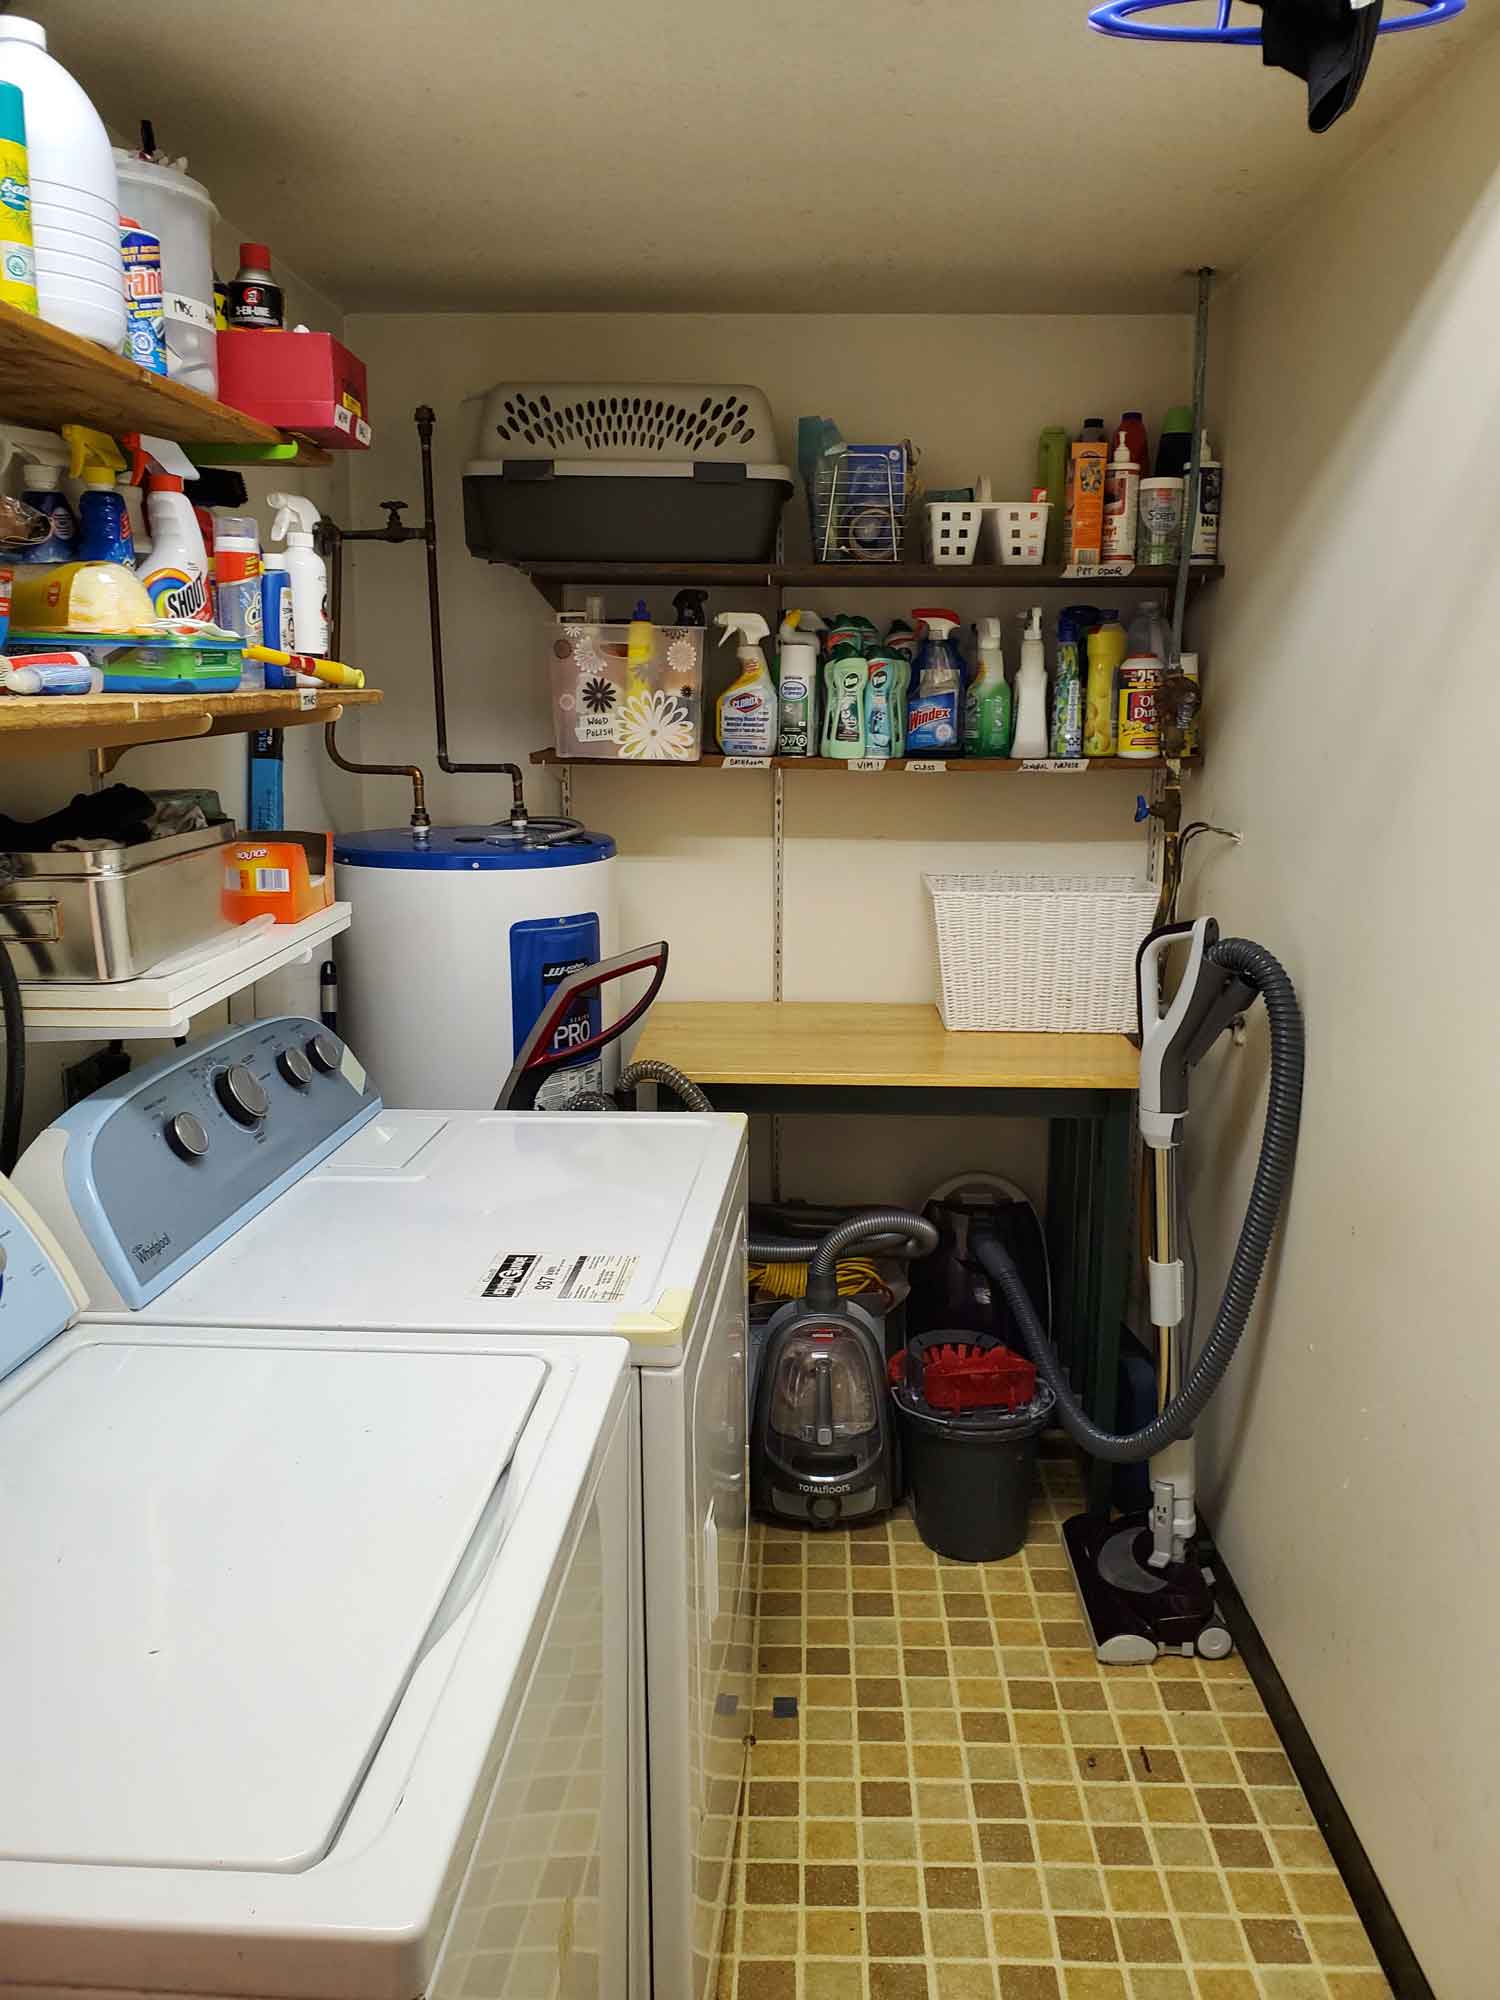 A laundry room with the side table, dryer and floor space cleared except for essential items